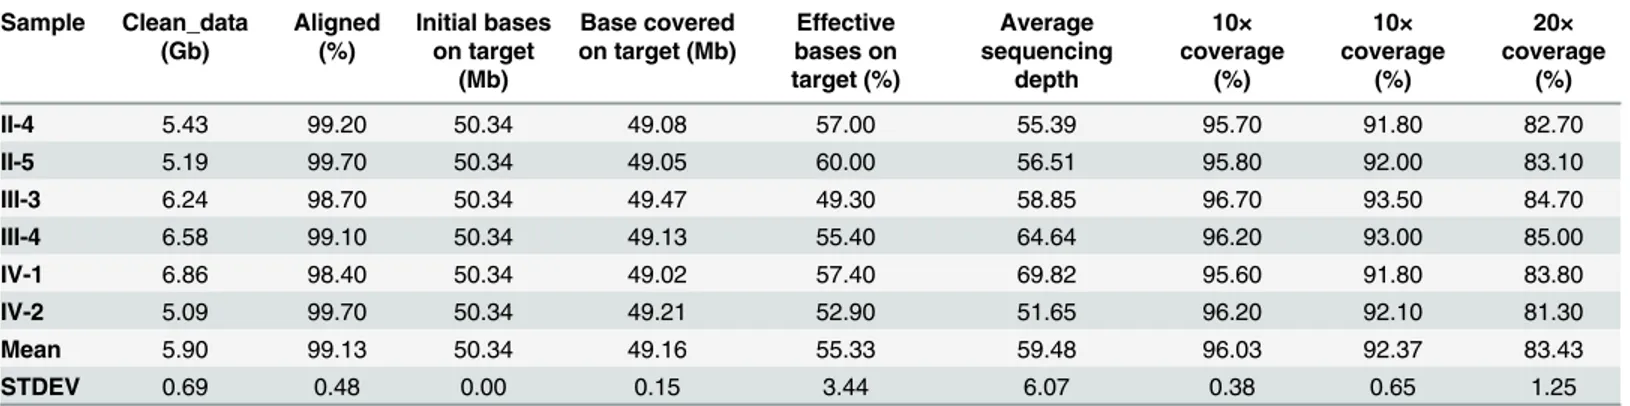 Table 2. Summary of the Exome Sequencing Data.